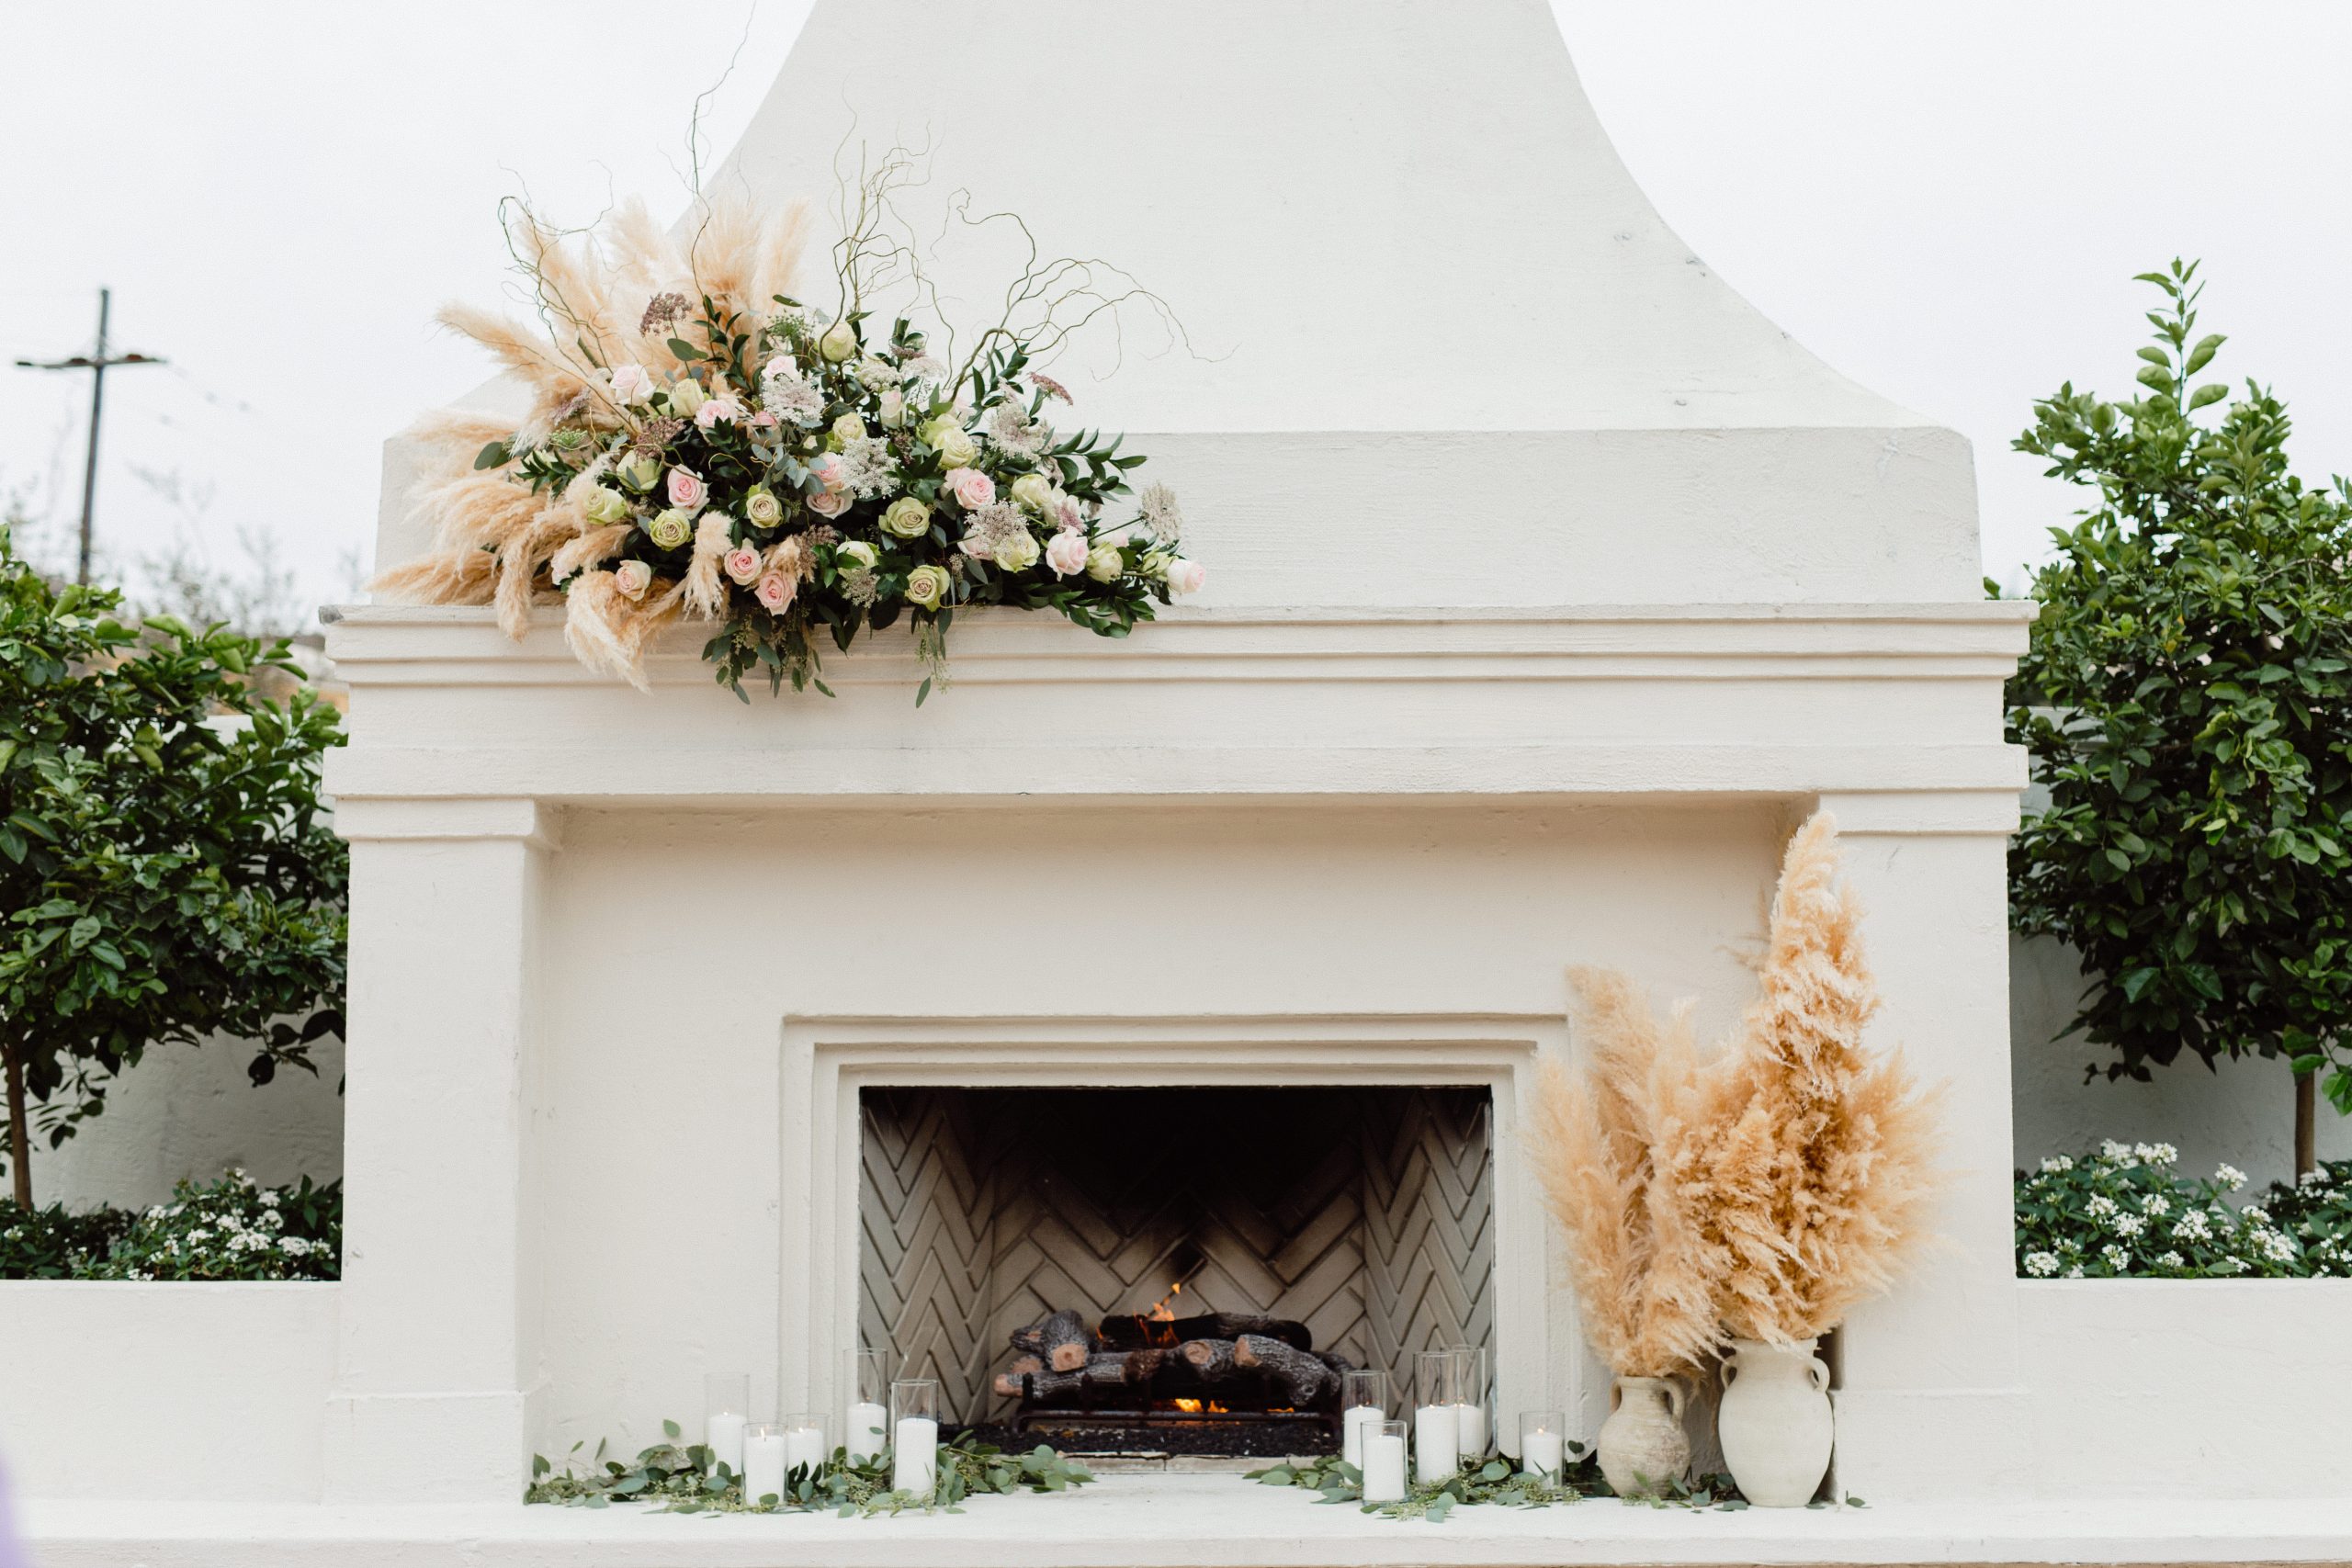 Boho Outdoor Wedding Ceremony Pampas Grass Flower Arrangements At Il Mercato Fireplace Kristen Souleau Photography 172 Scaled